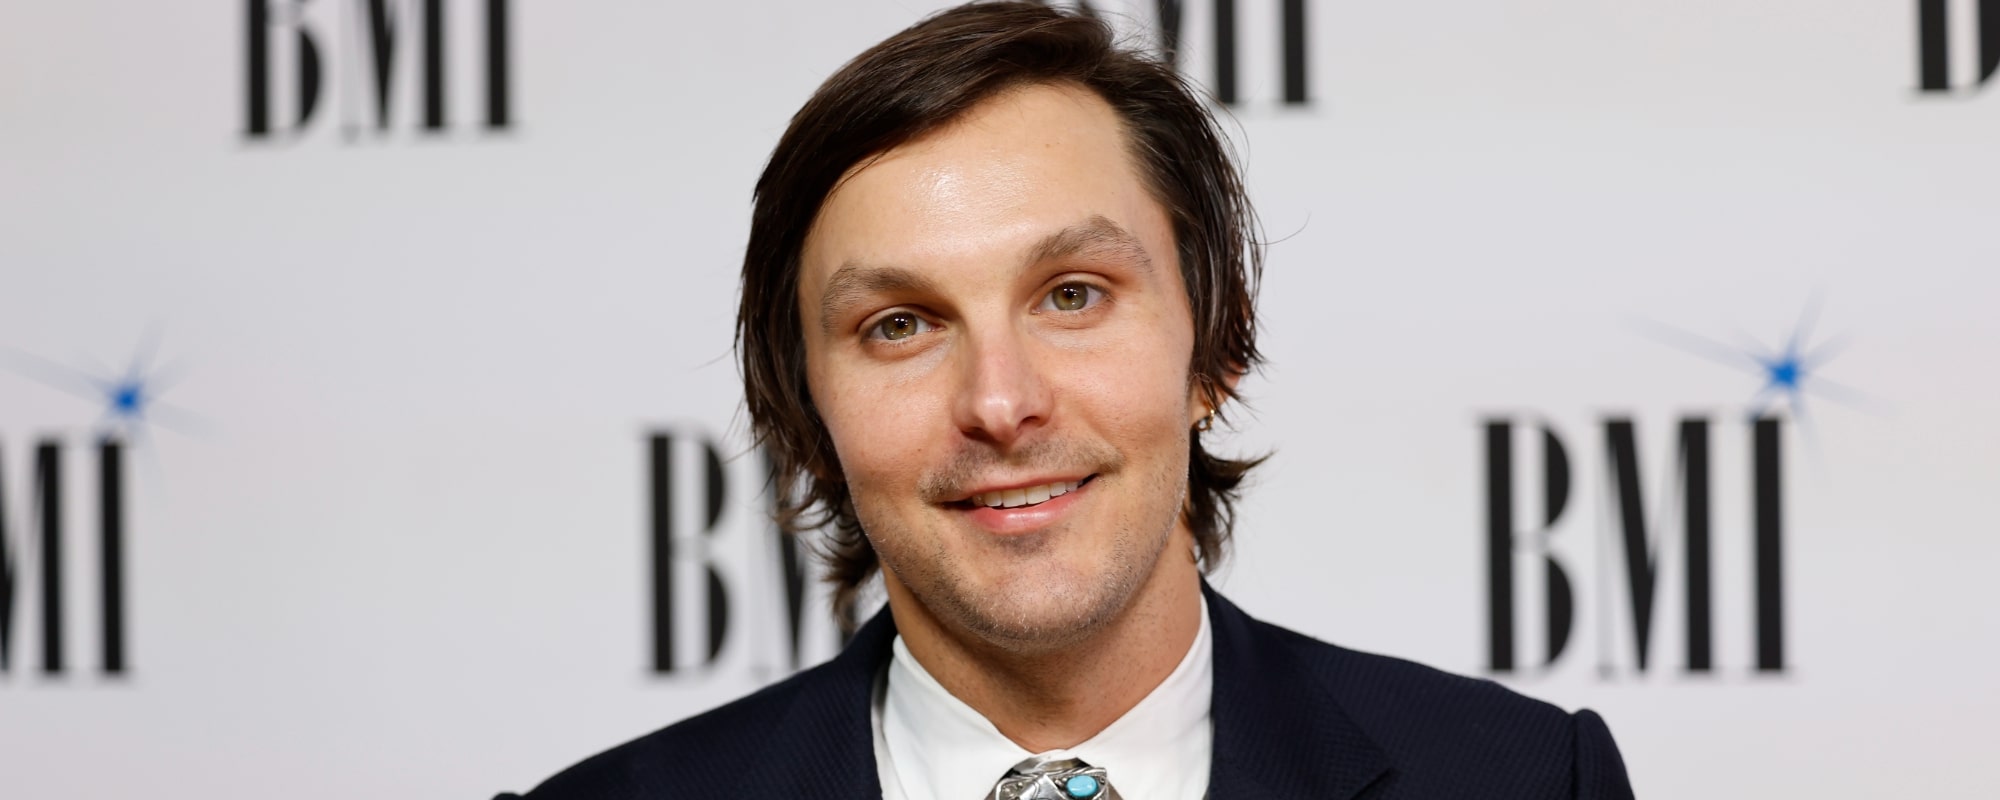 Charlie Worsham Introduces Compadres Fund to Support Arts Education, Mental Health Services